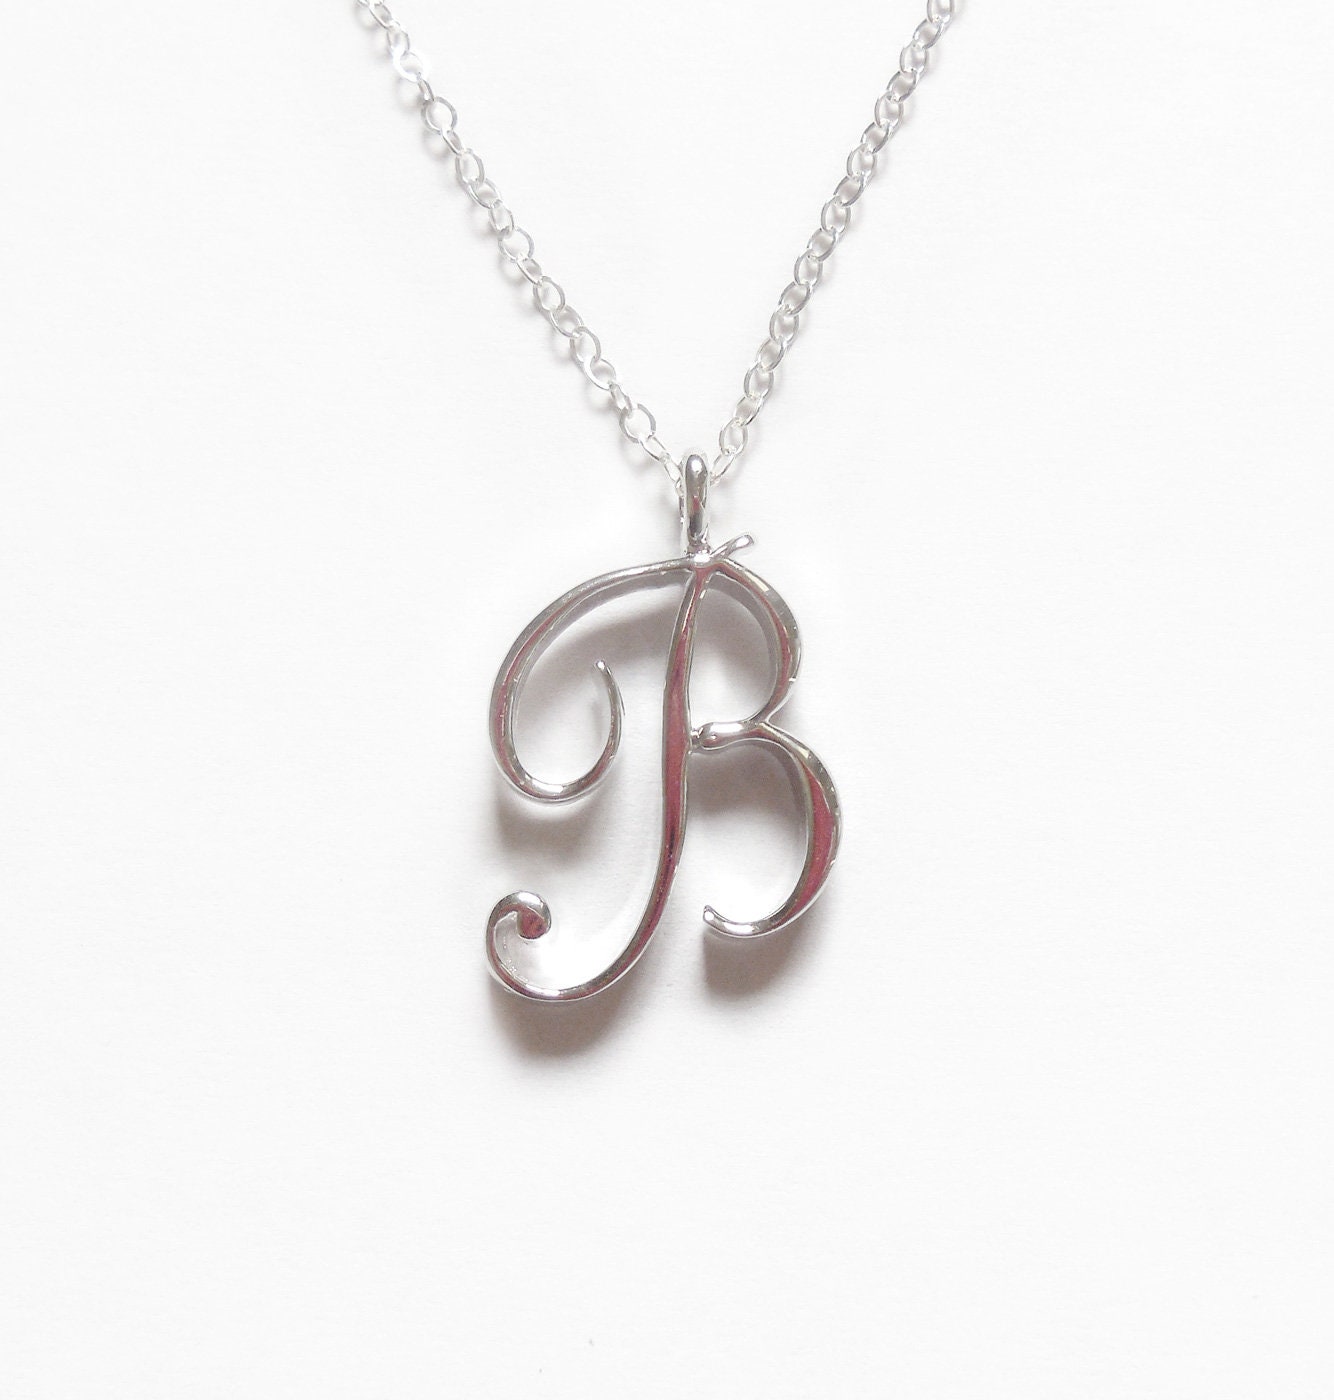 14K Cursive Letter Charms With Cubic Zirconium, A to Z Initial